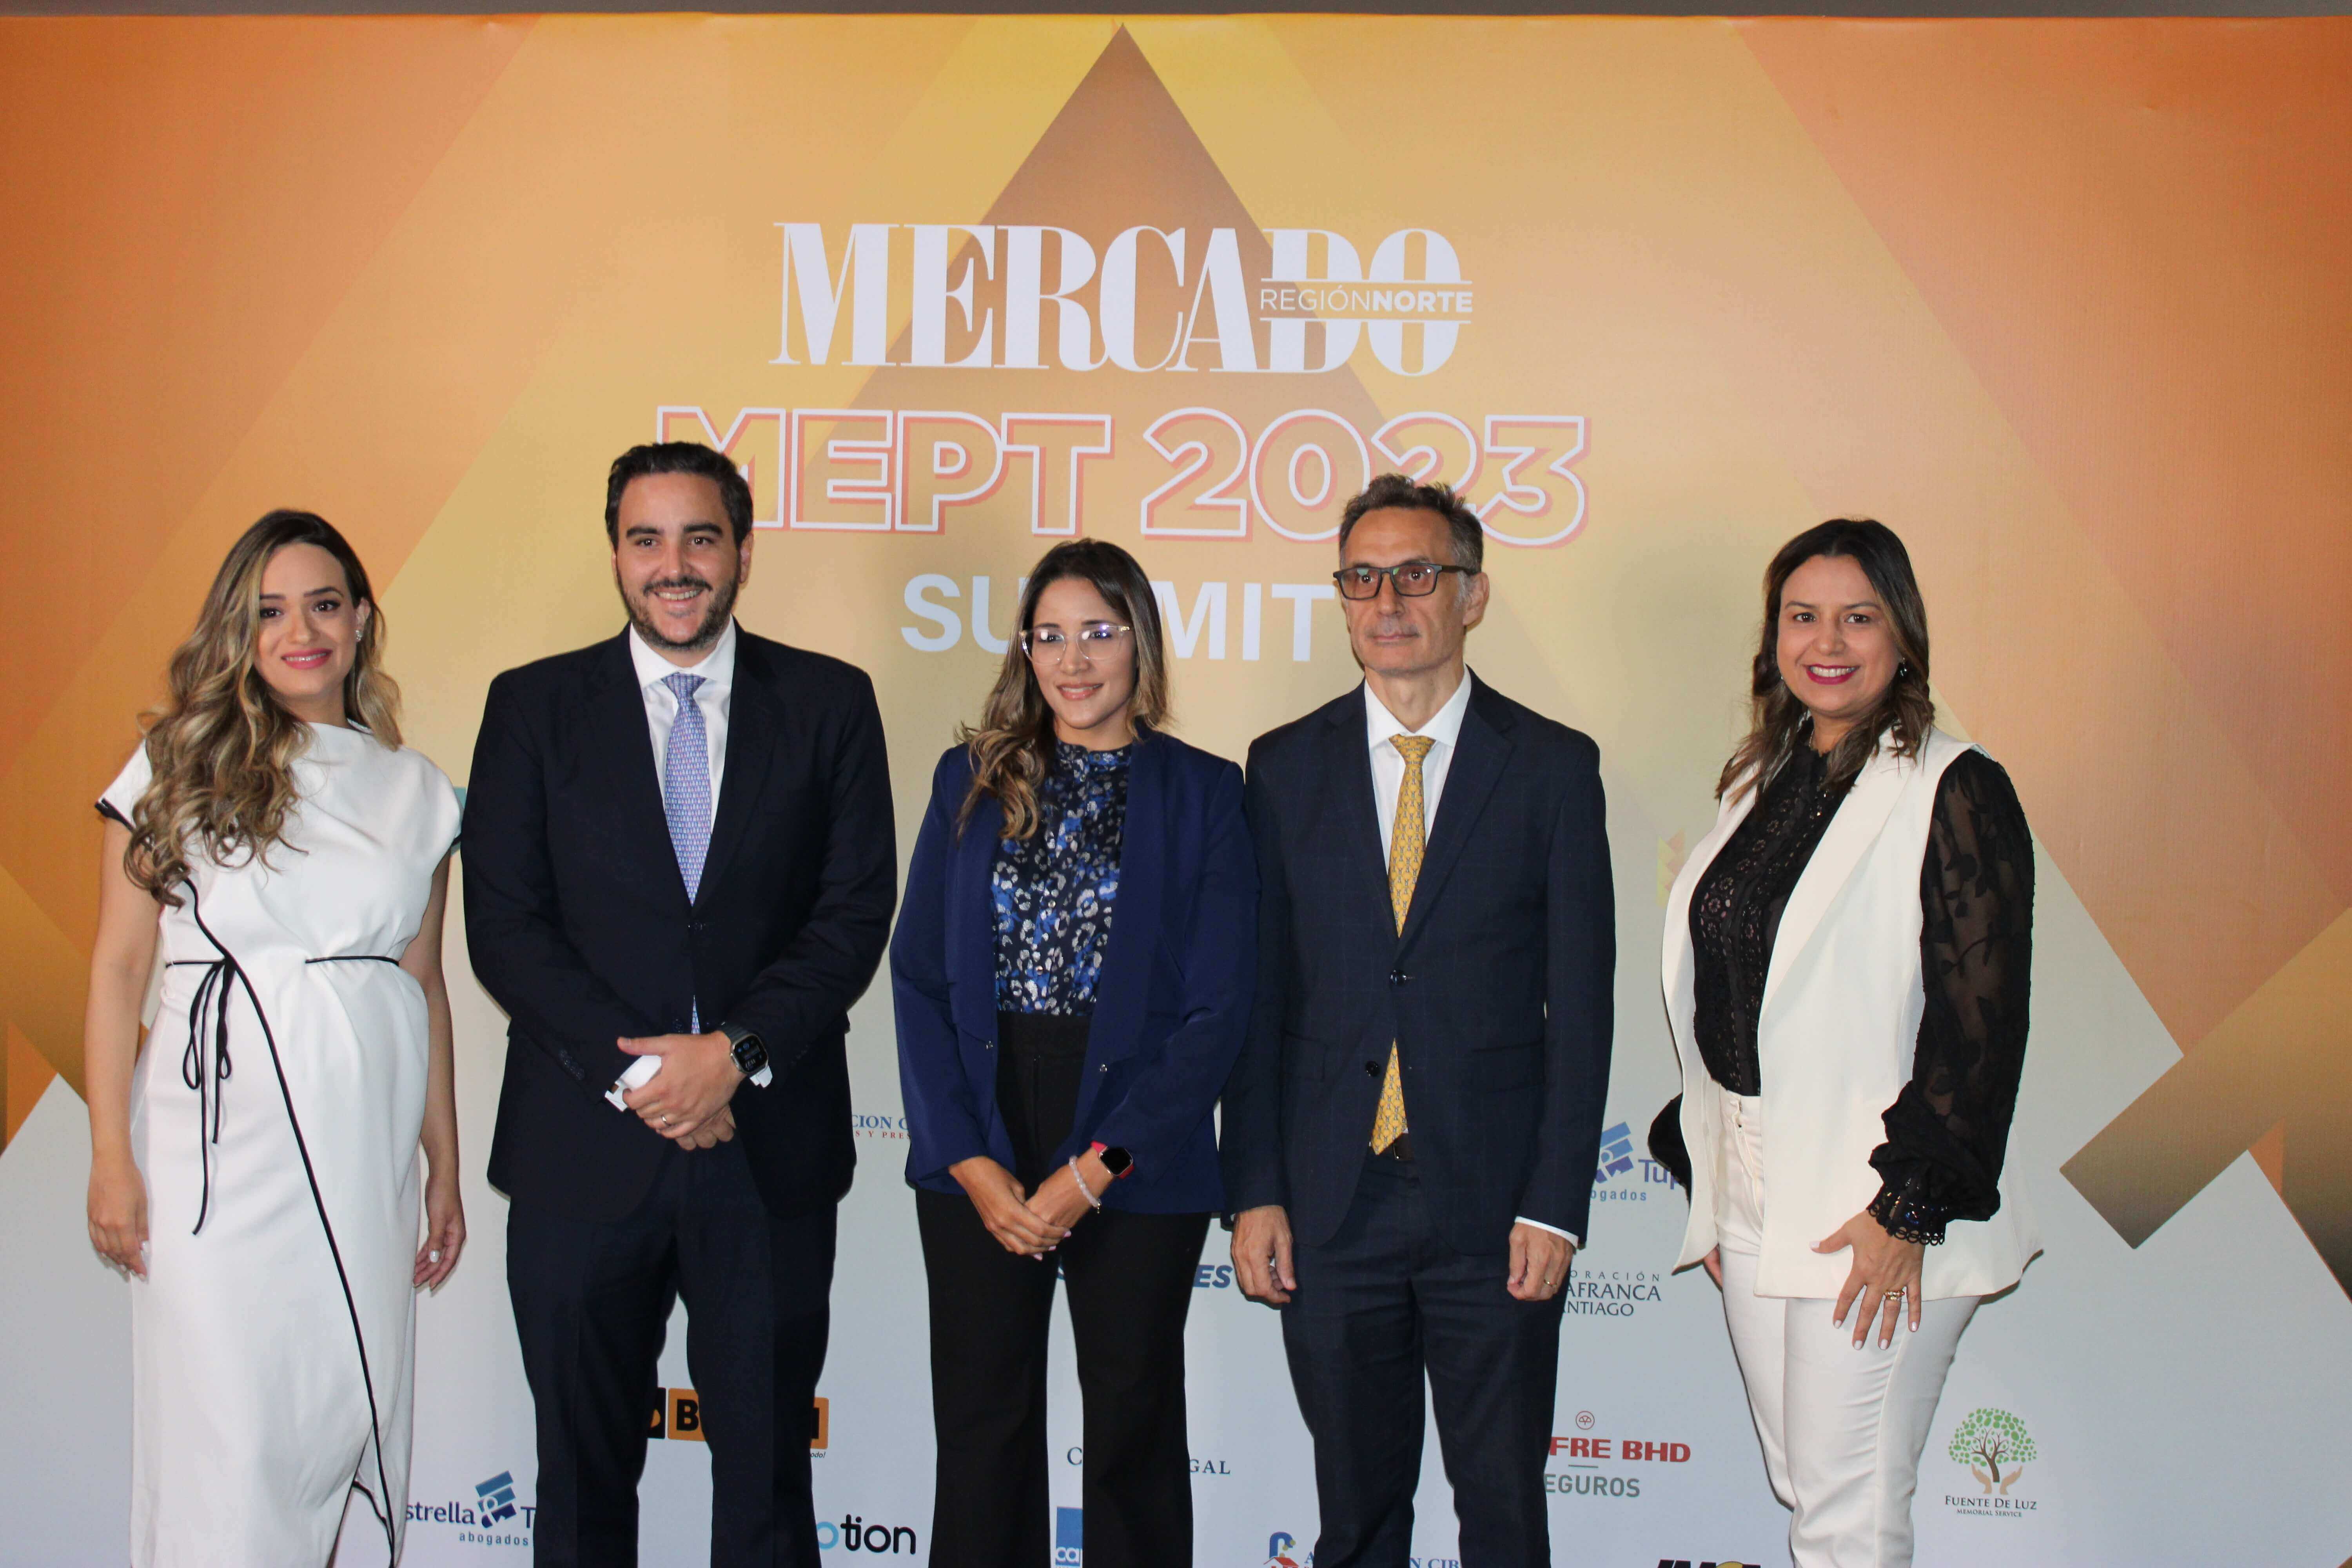 Best Places to Work in the Dominican Republic (Revista Mercado's Summit)